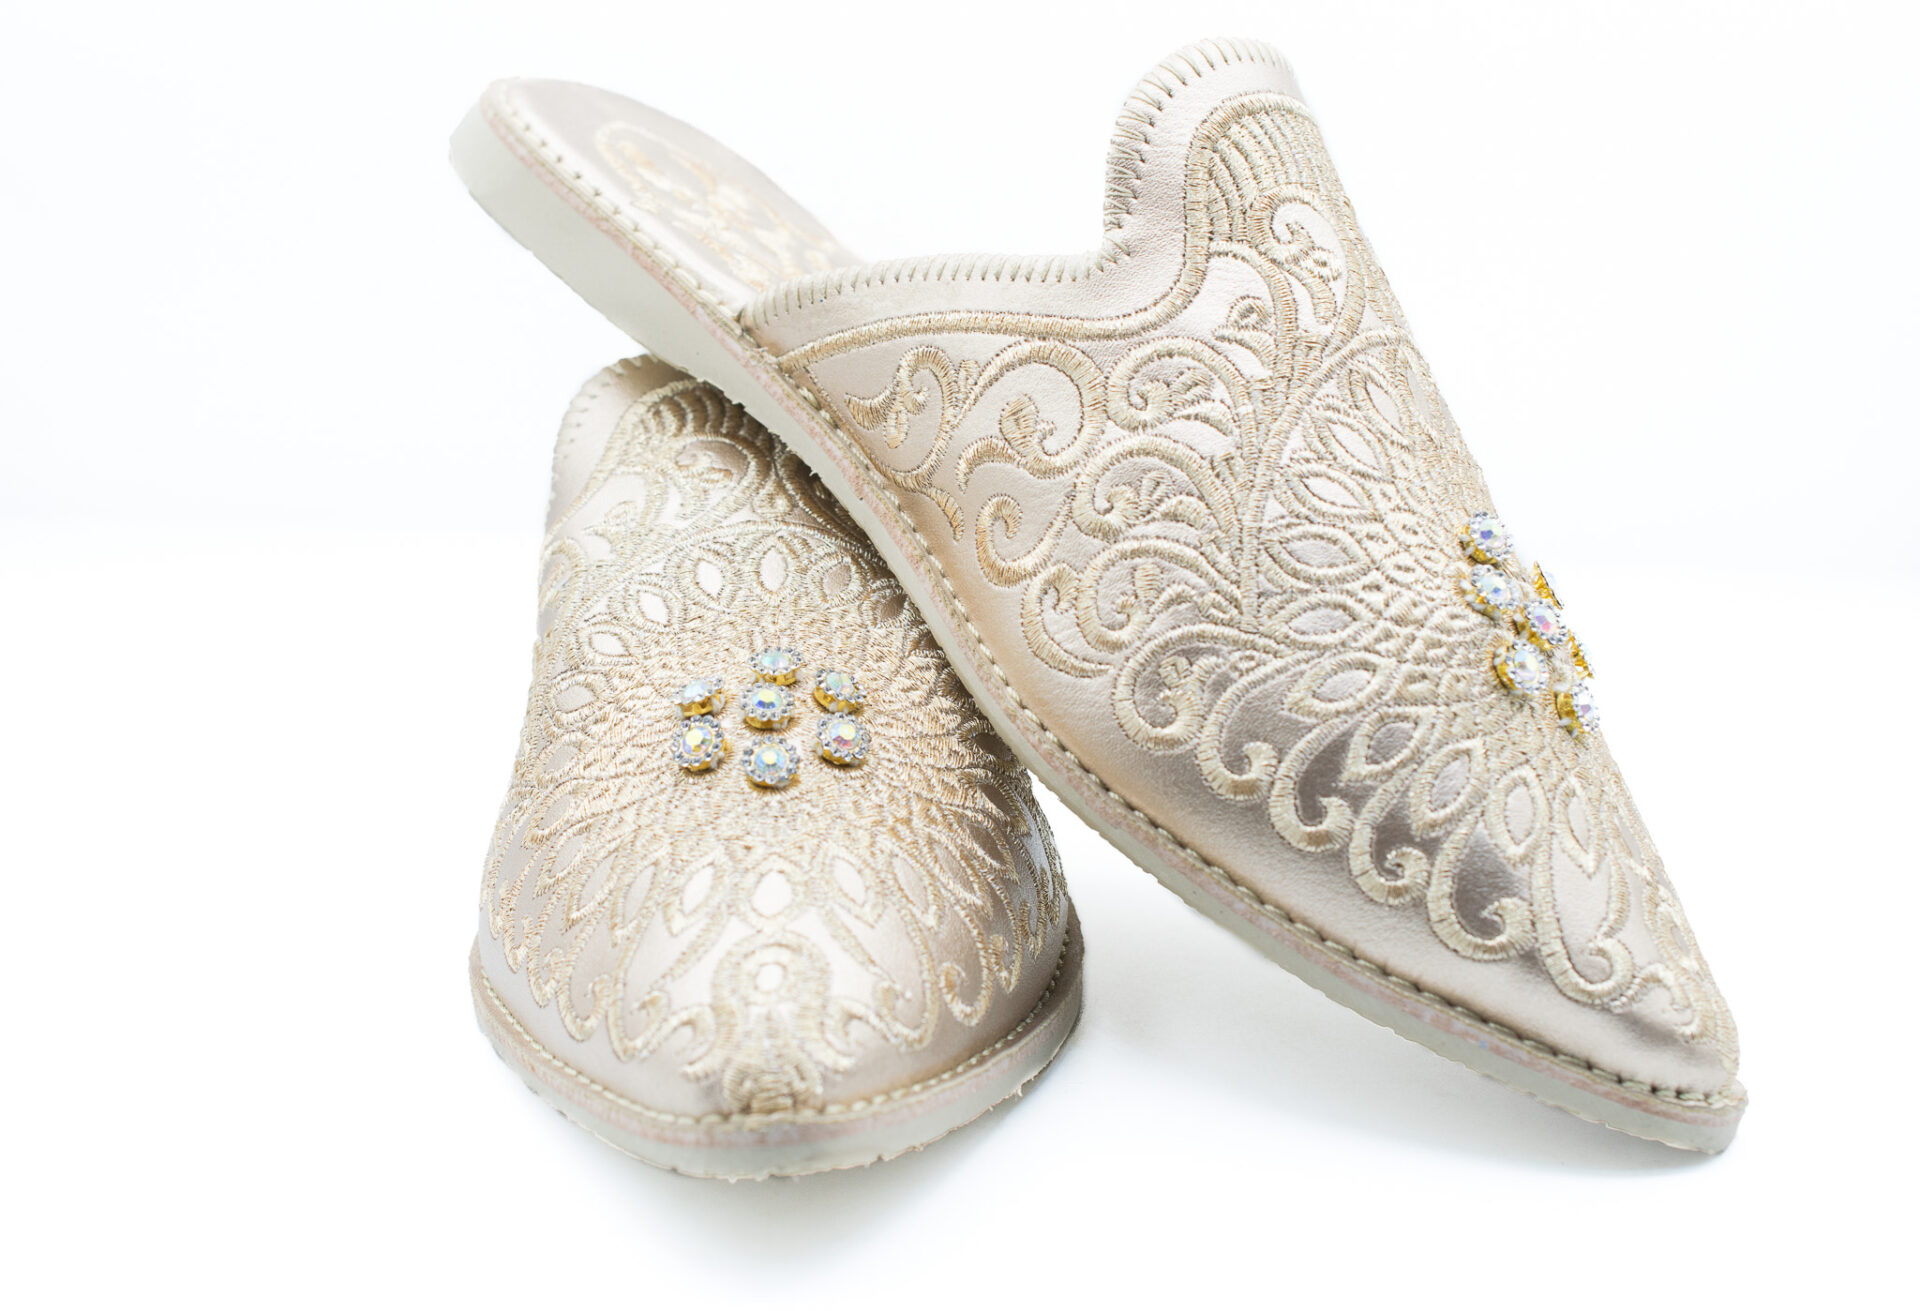 Moroccan leather slippers, wedding mules - Madeinatlas